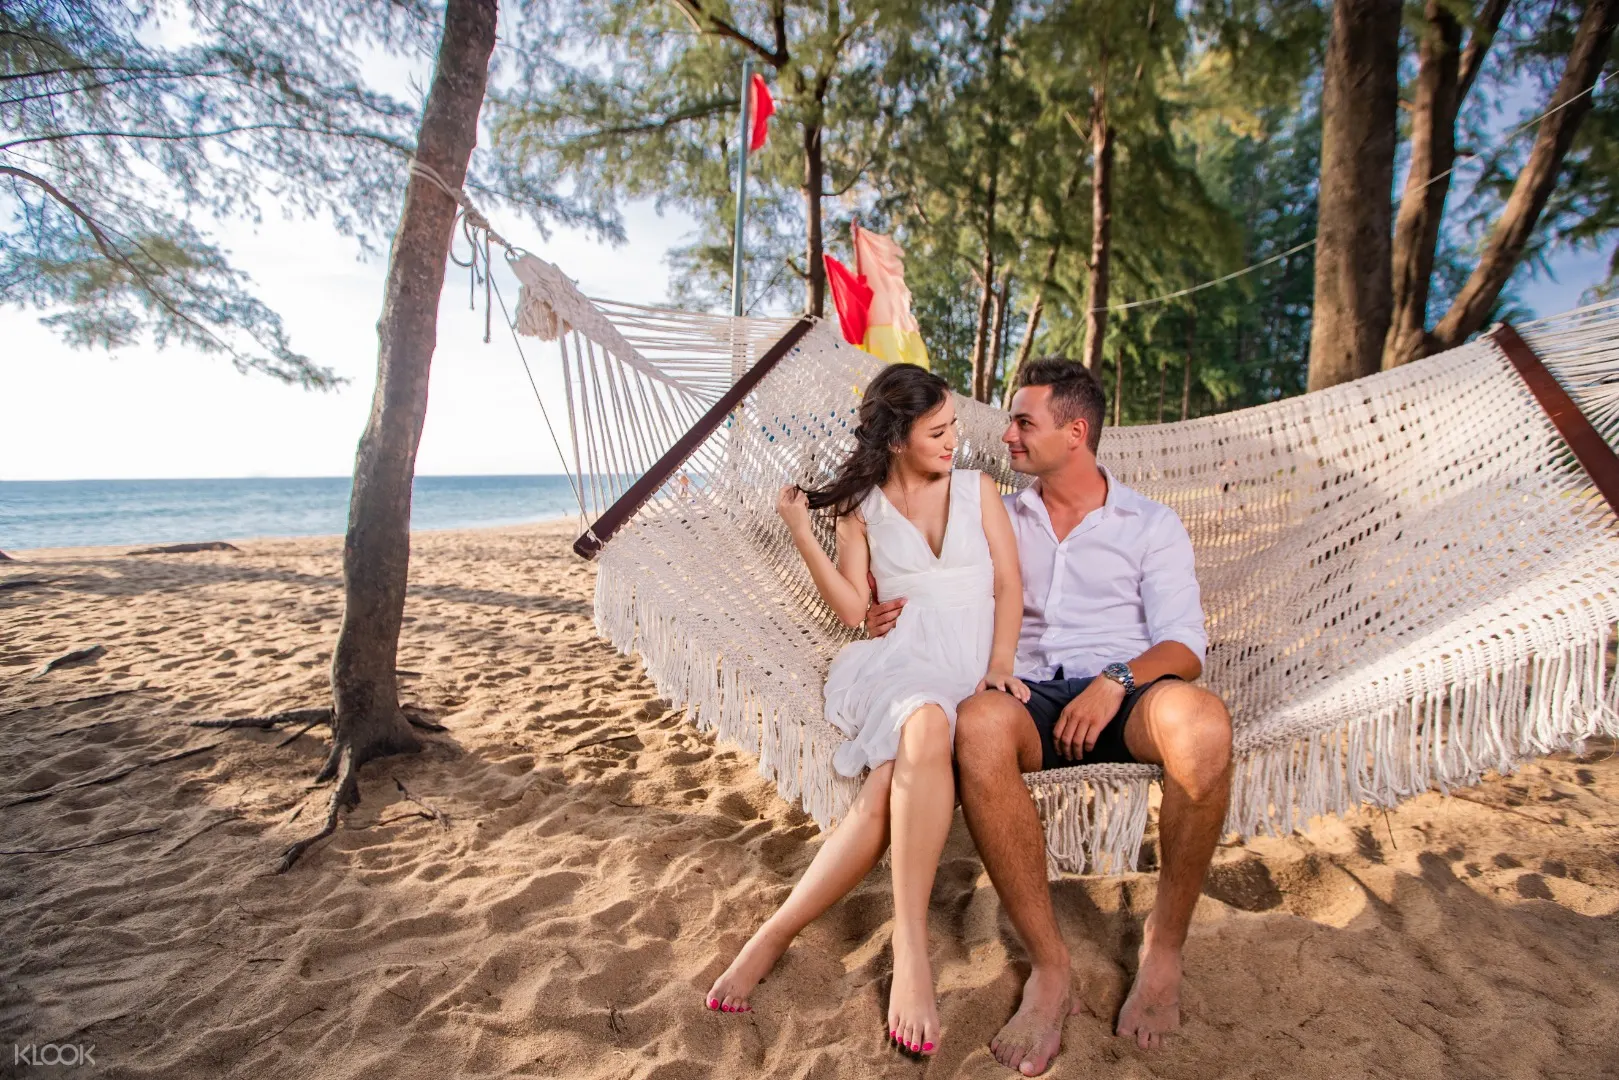 Pre Wedding Shoot Experience In Phuket Images, Photos, Reviews